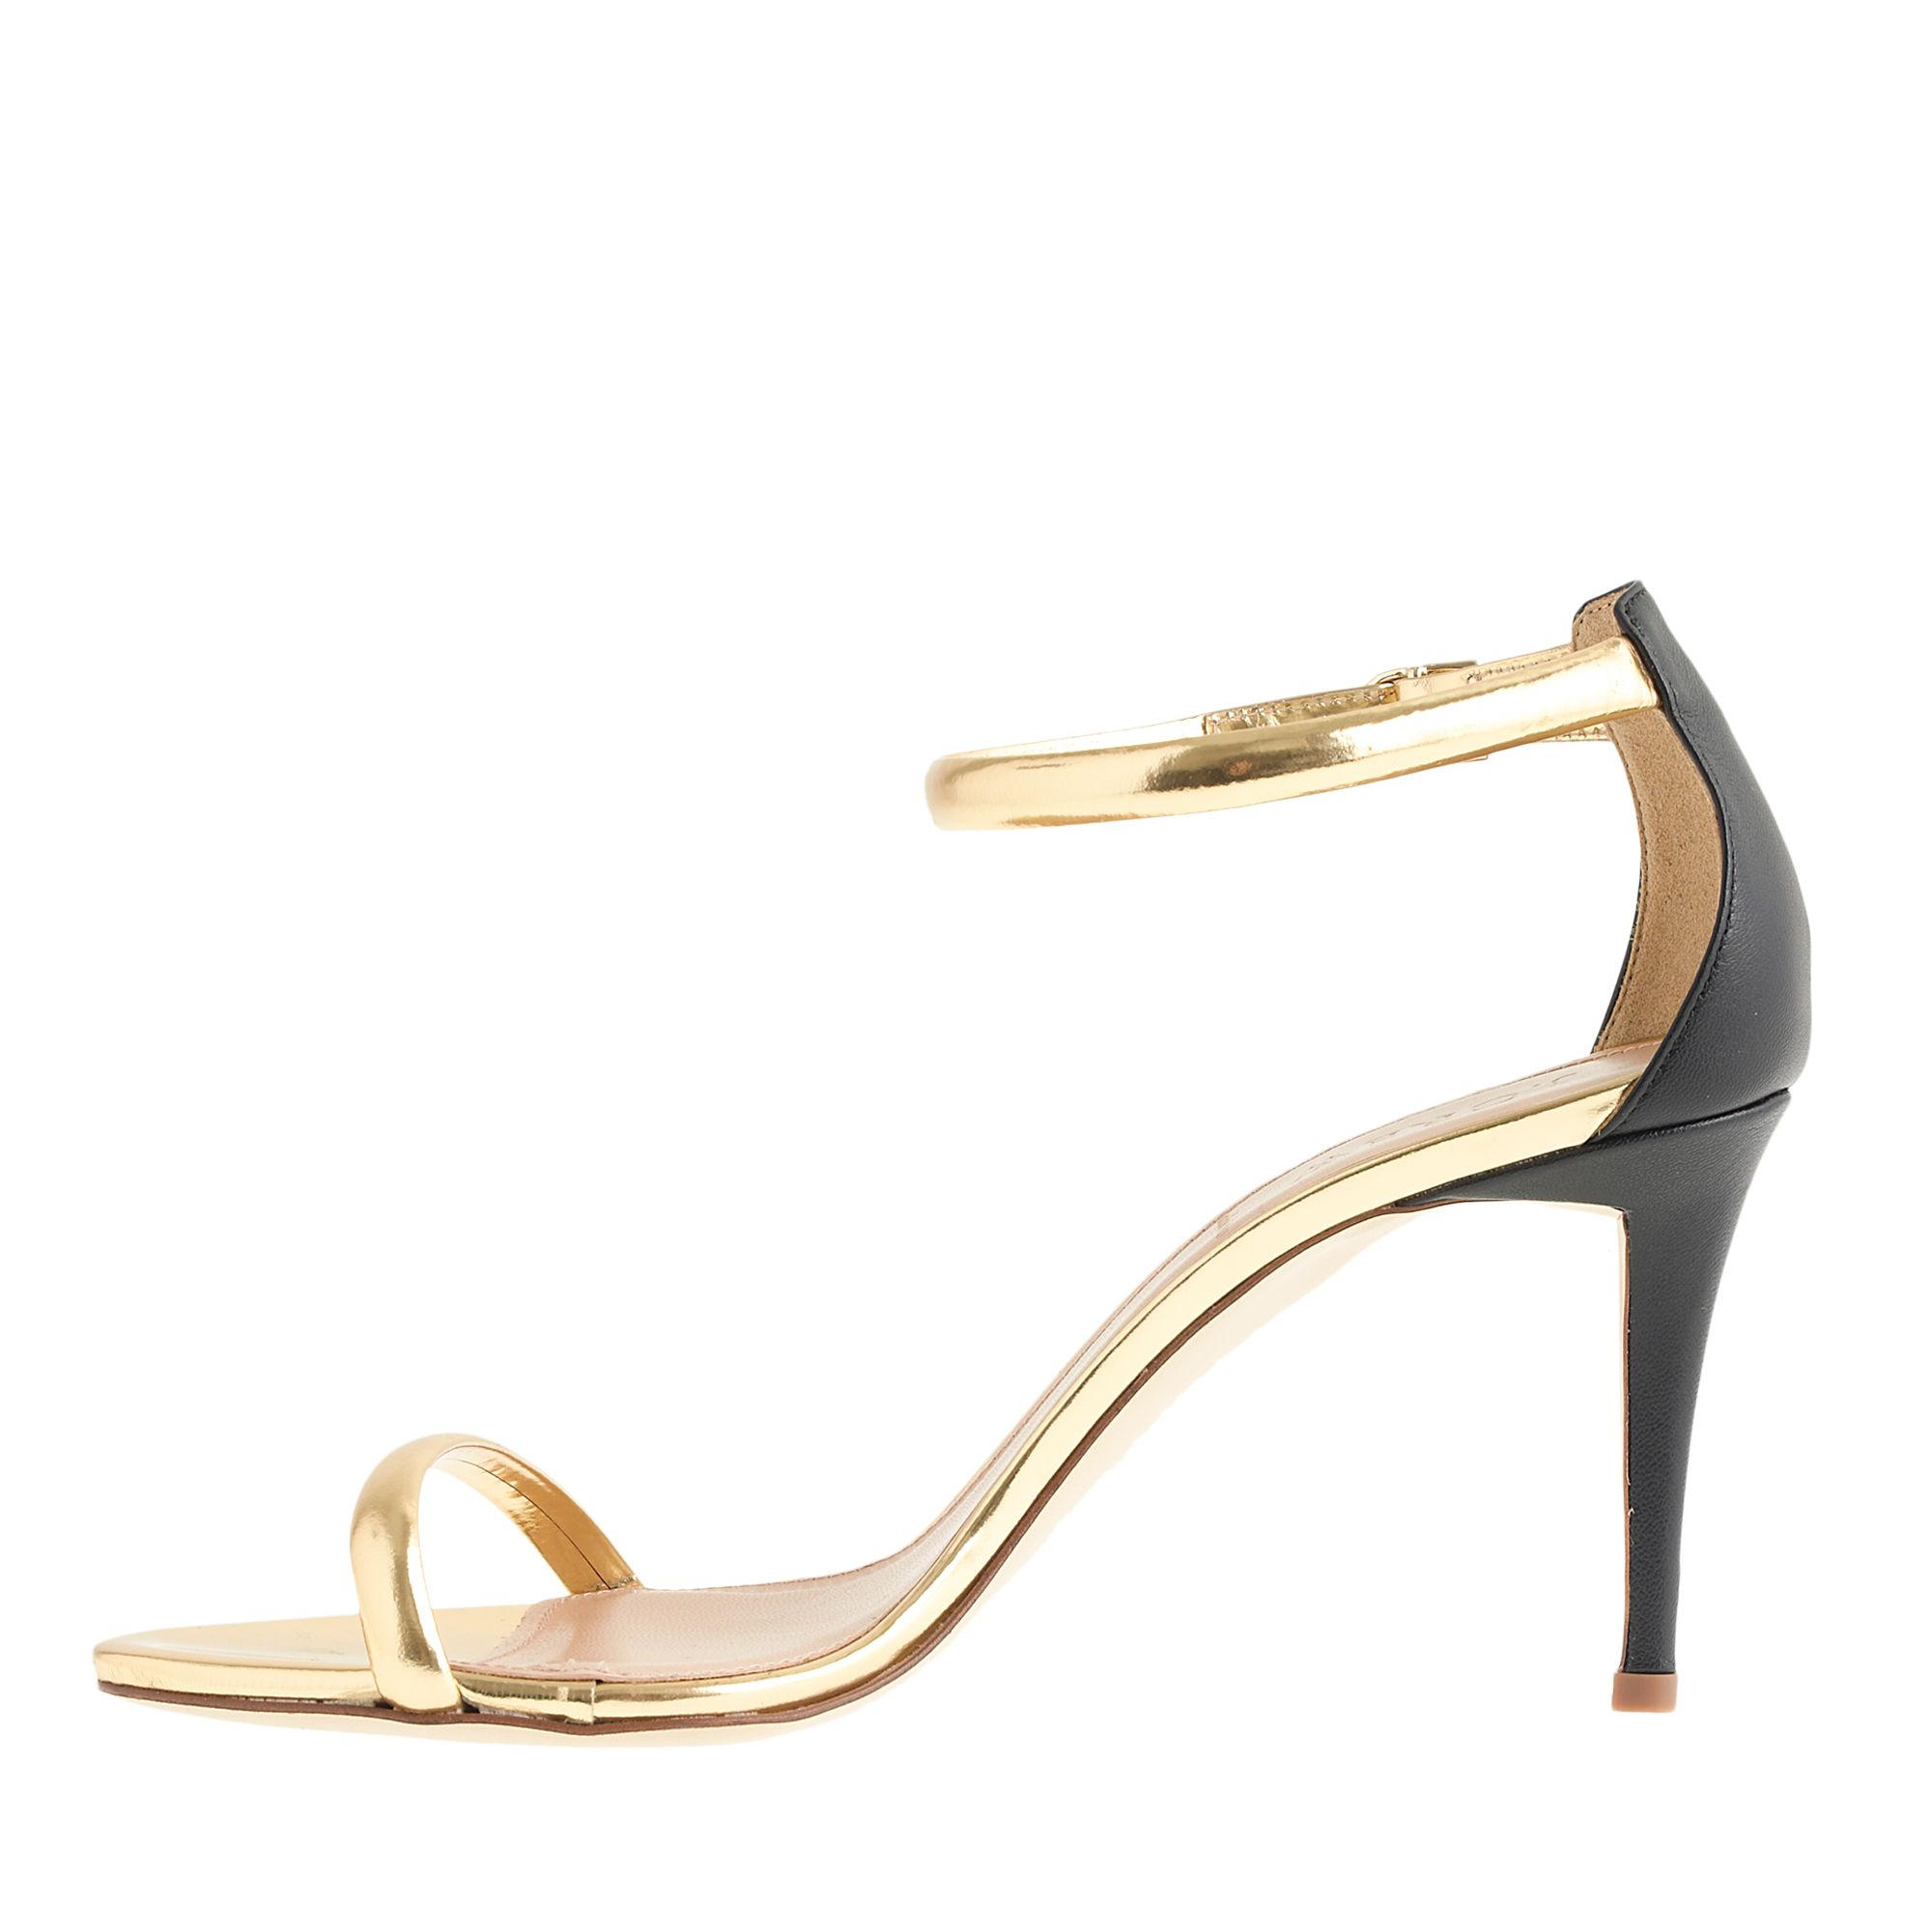 J.crew Mixed Leather Strappy High-heel Sandals in Gold (metallic gold ...